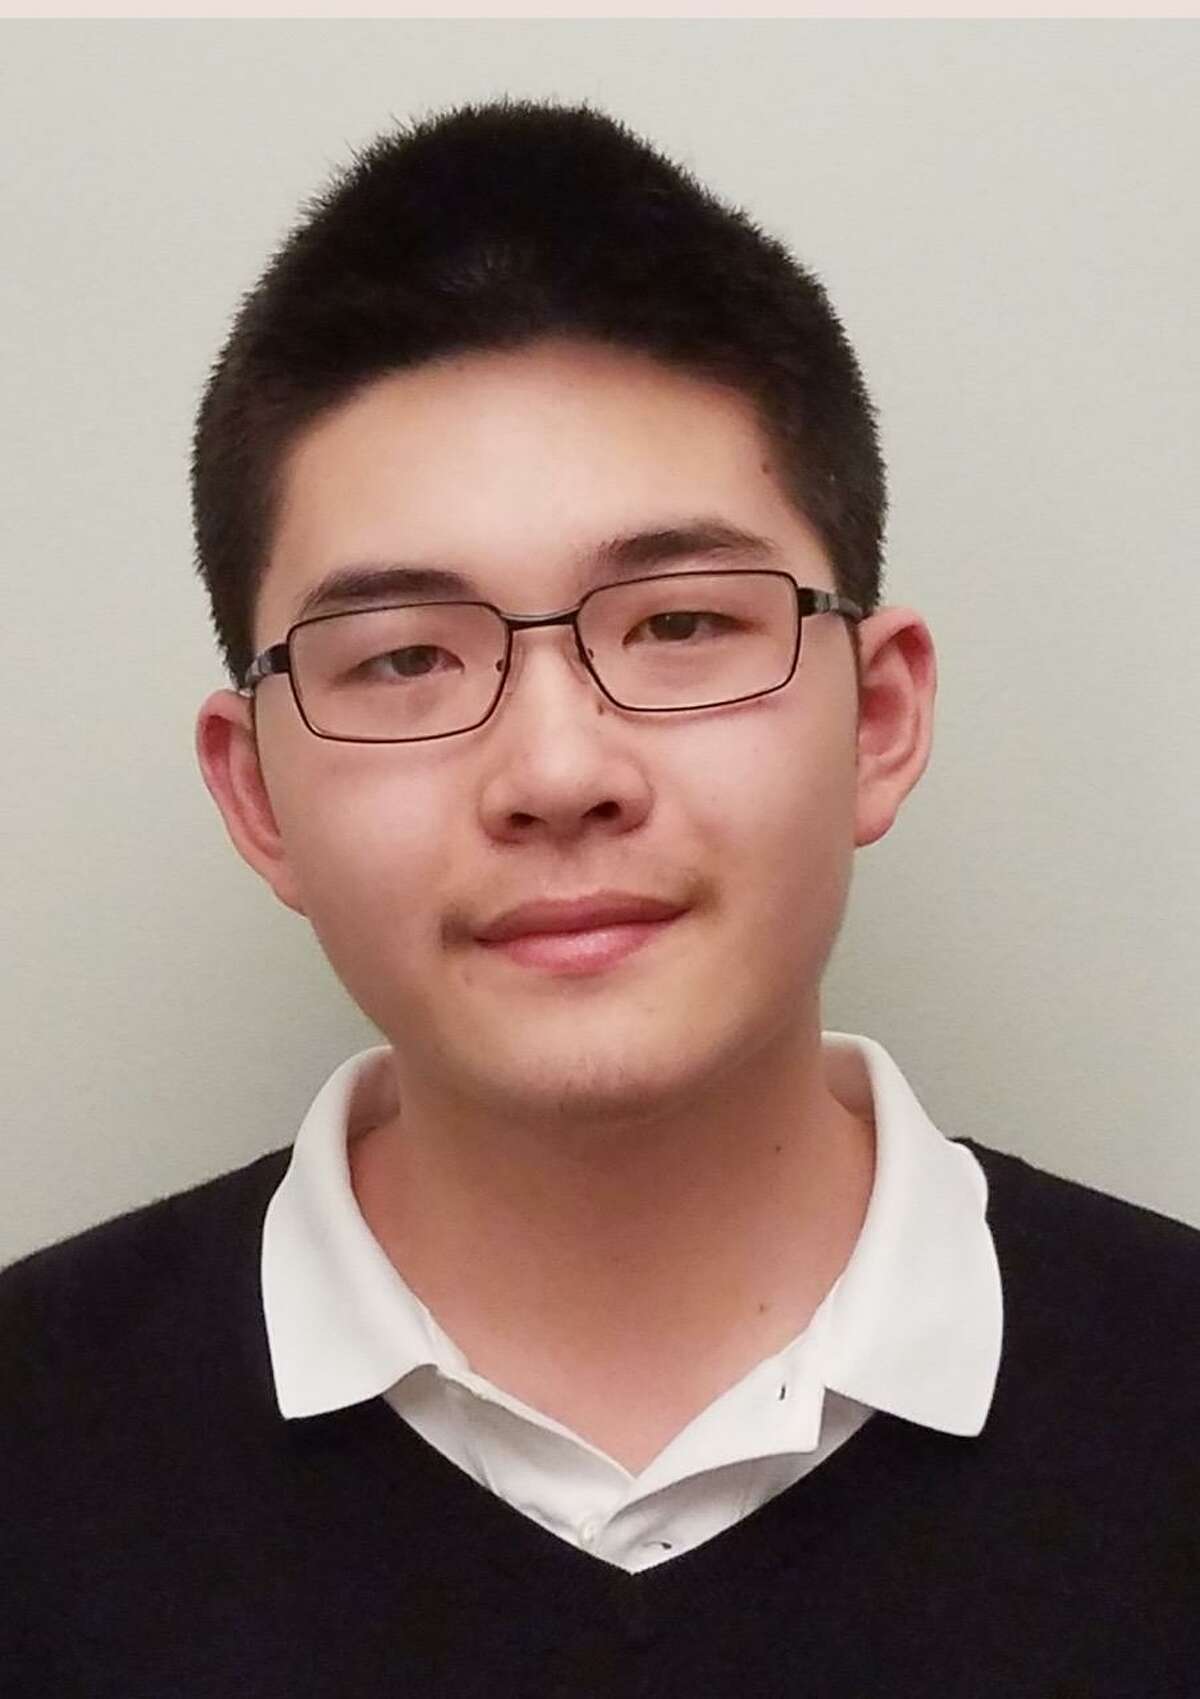 King School junior and Stamford resident Jason Liu recently placed third in a division of PhysicsBowl, an annual worldwide physics competition.